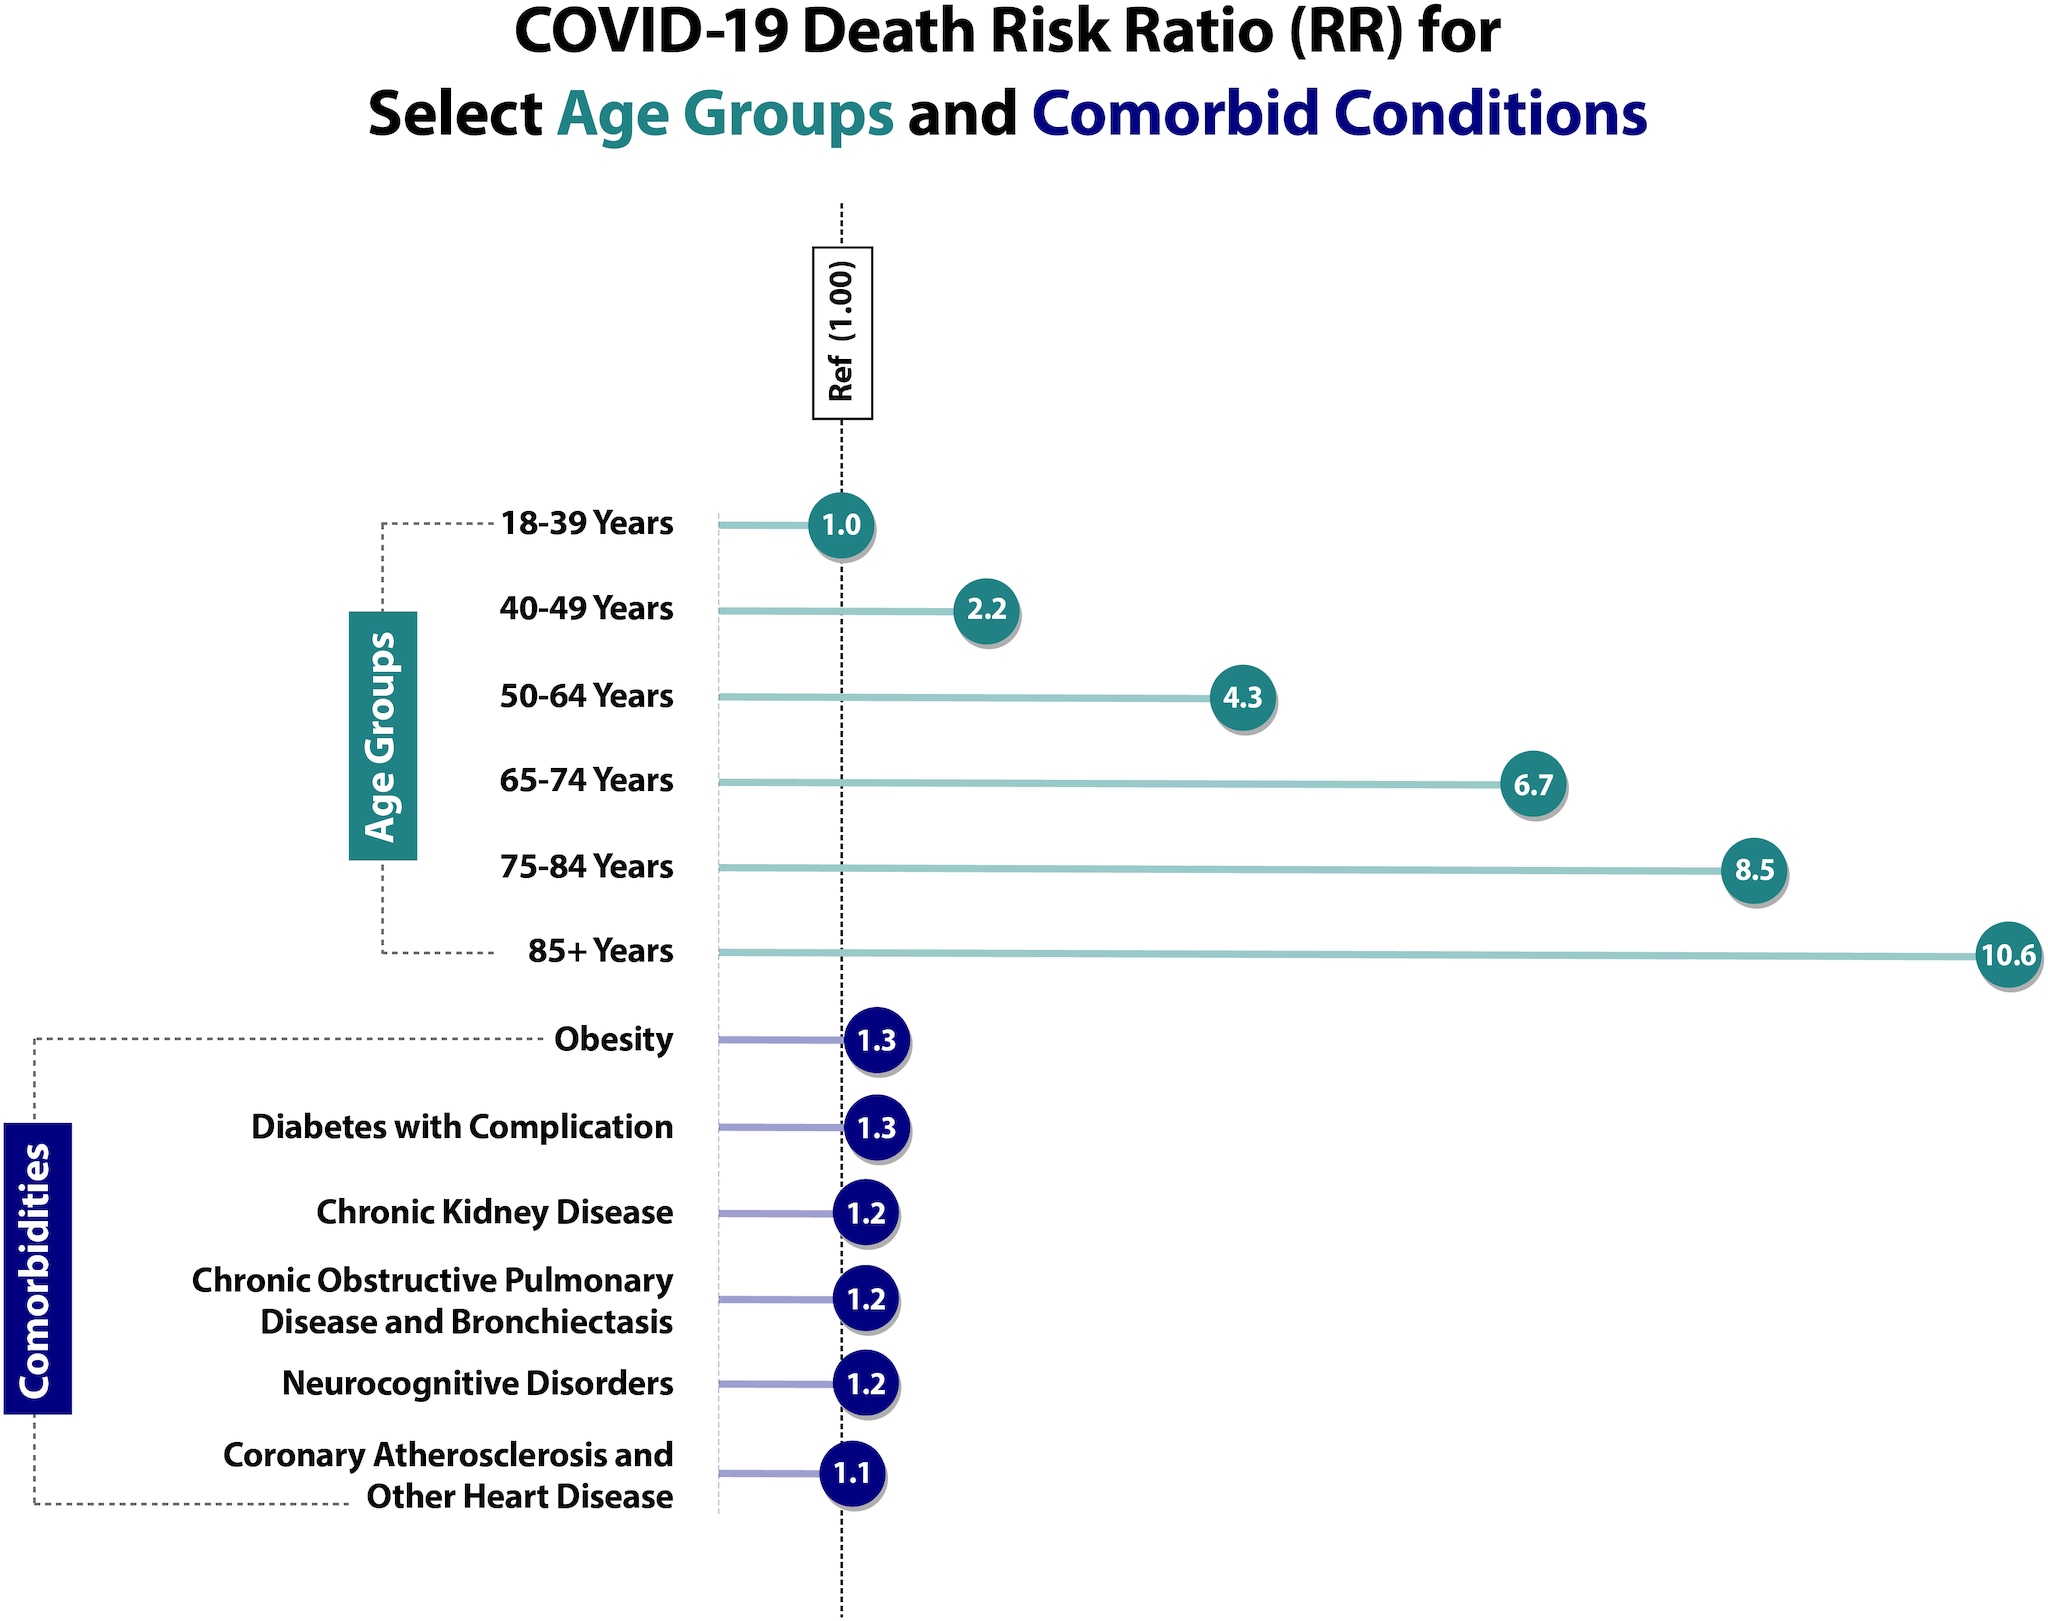 The figure is titled, 'COVID-19 Death Risk Ratio (RR) for Select Age Groups and Comorbid Conditions.' While conditions like obesity and diabetes with complications were associated with a higher risk of death, people aged 85 or more years had the highest risk ratio of death.